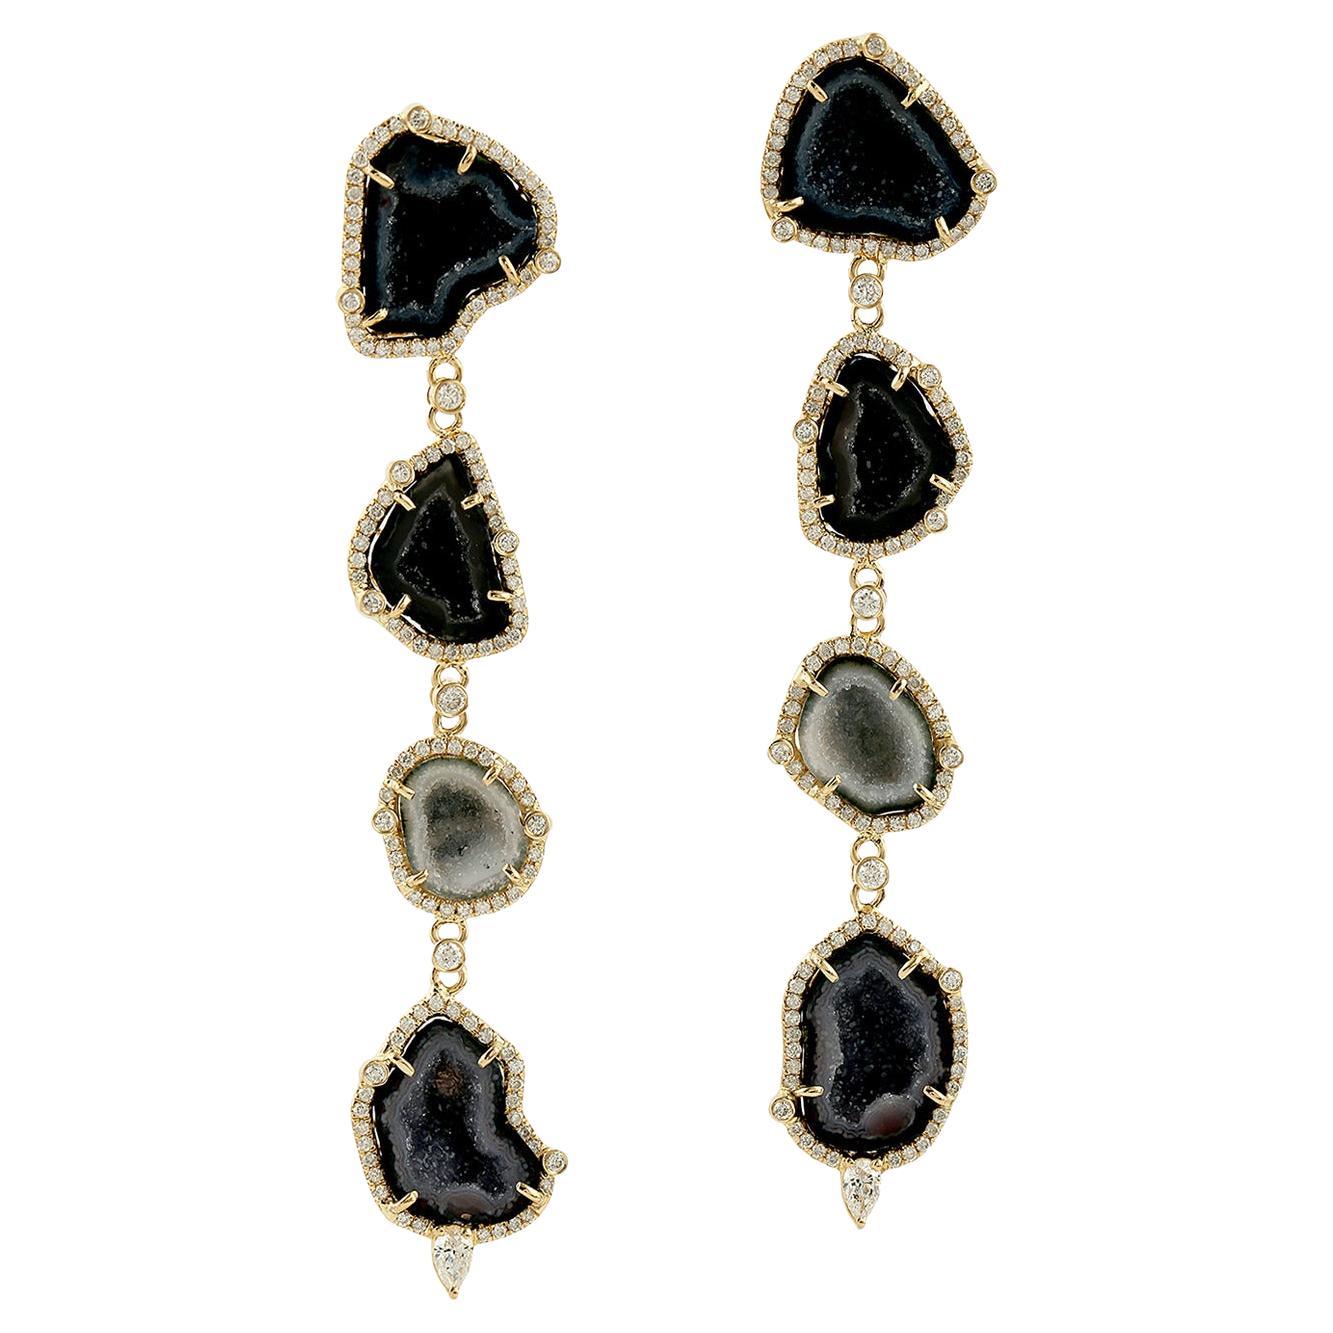 Multi Tier Sliced Geode Dangle Earrings With Diamonds Made In 18k yellow Gold